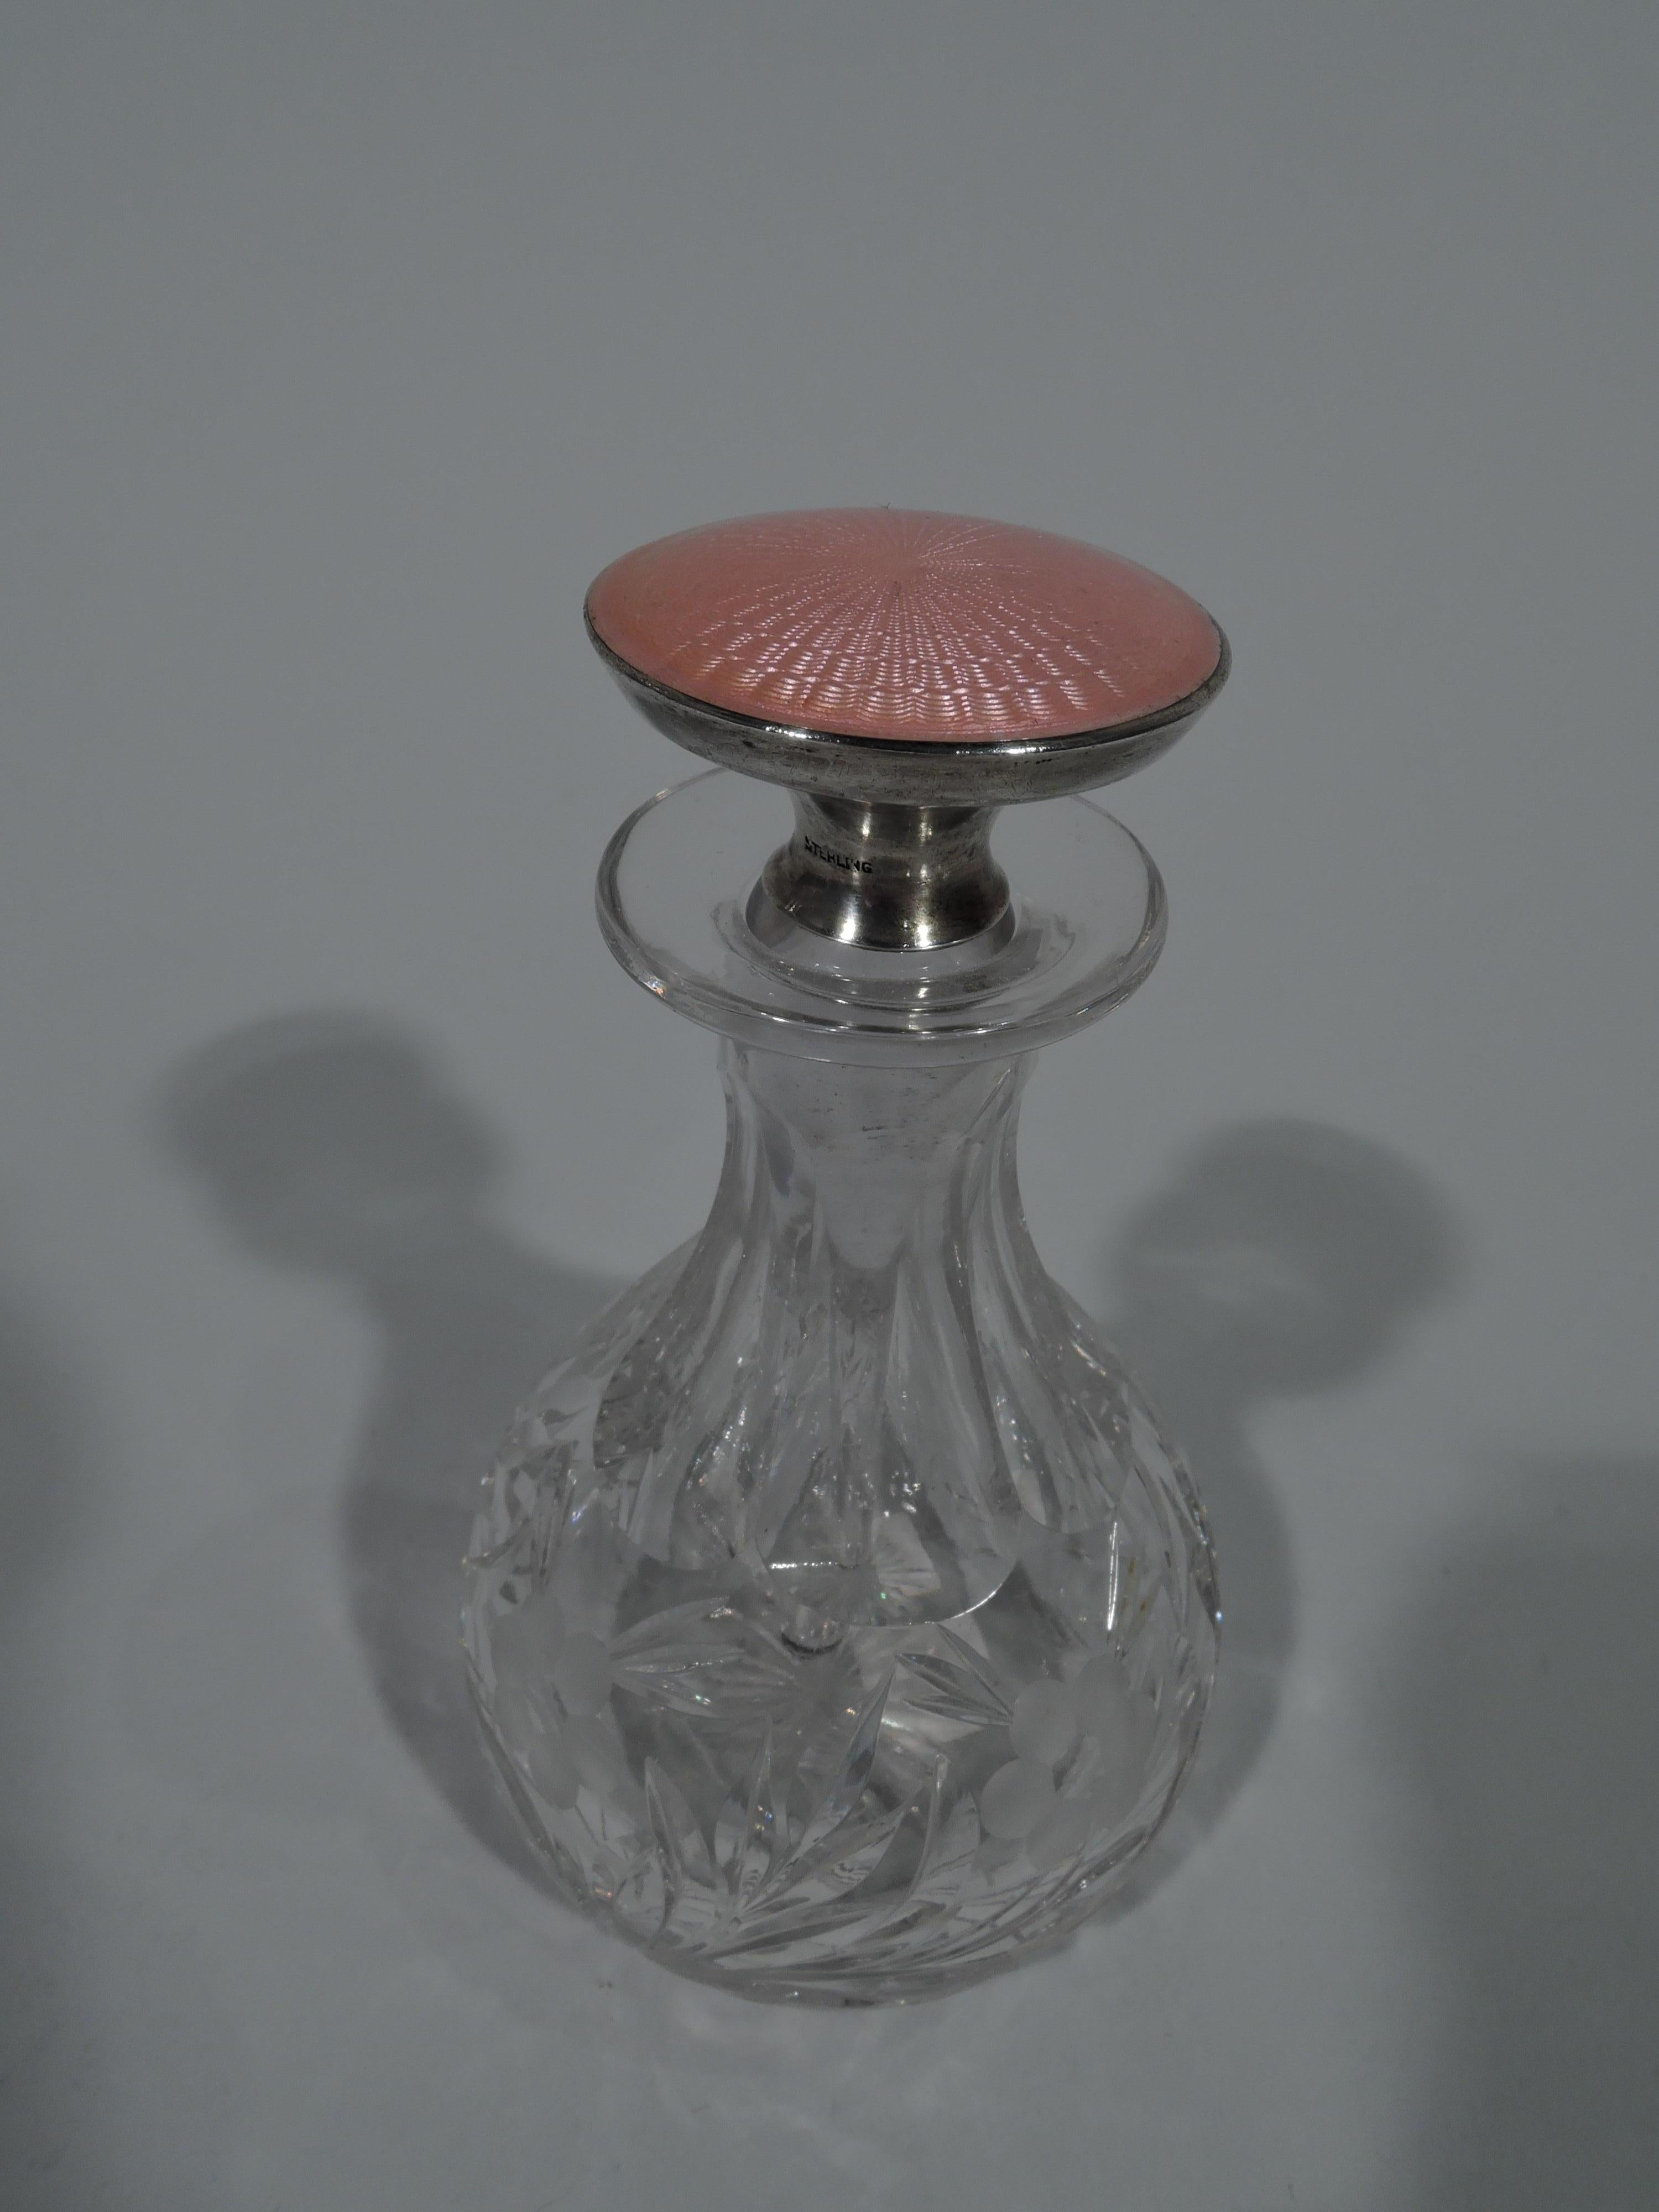 Pretty American Edwardian perfume, ca 1910. Ovoid crystal battle with acid-etched and stylized flower branch and faceted neck. Stopper sterling silver with radiating pink guilloche top and dagger plug. Stopper marked “Sterling”. 